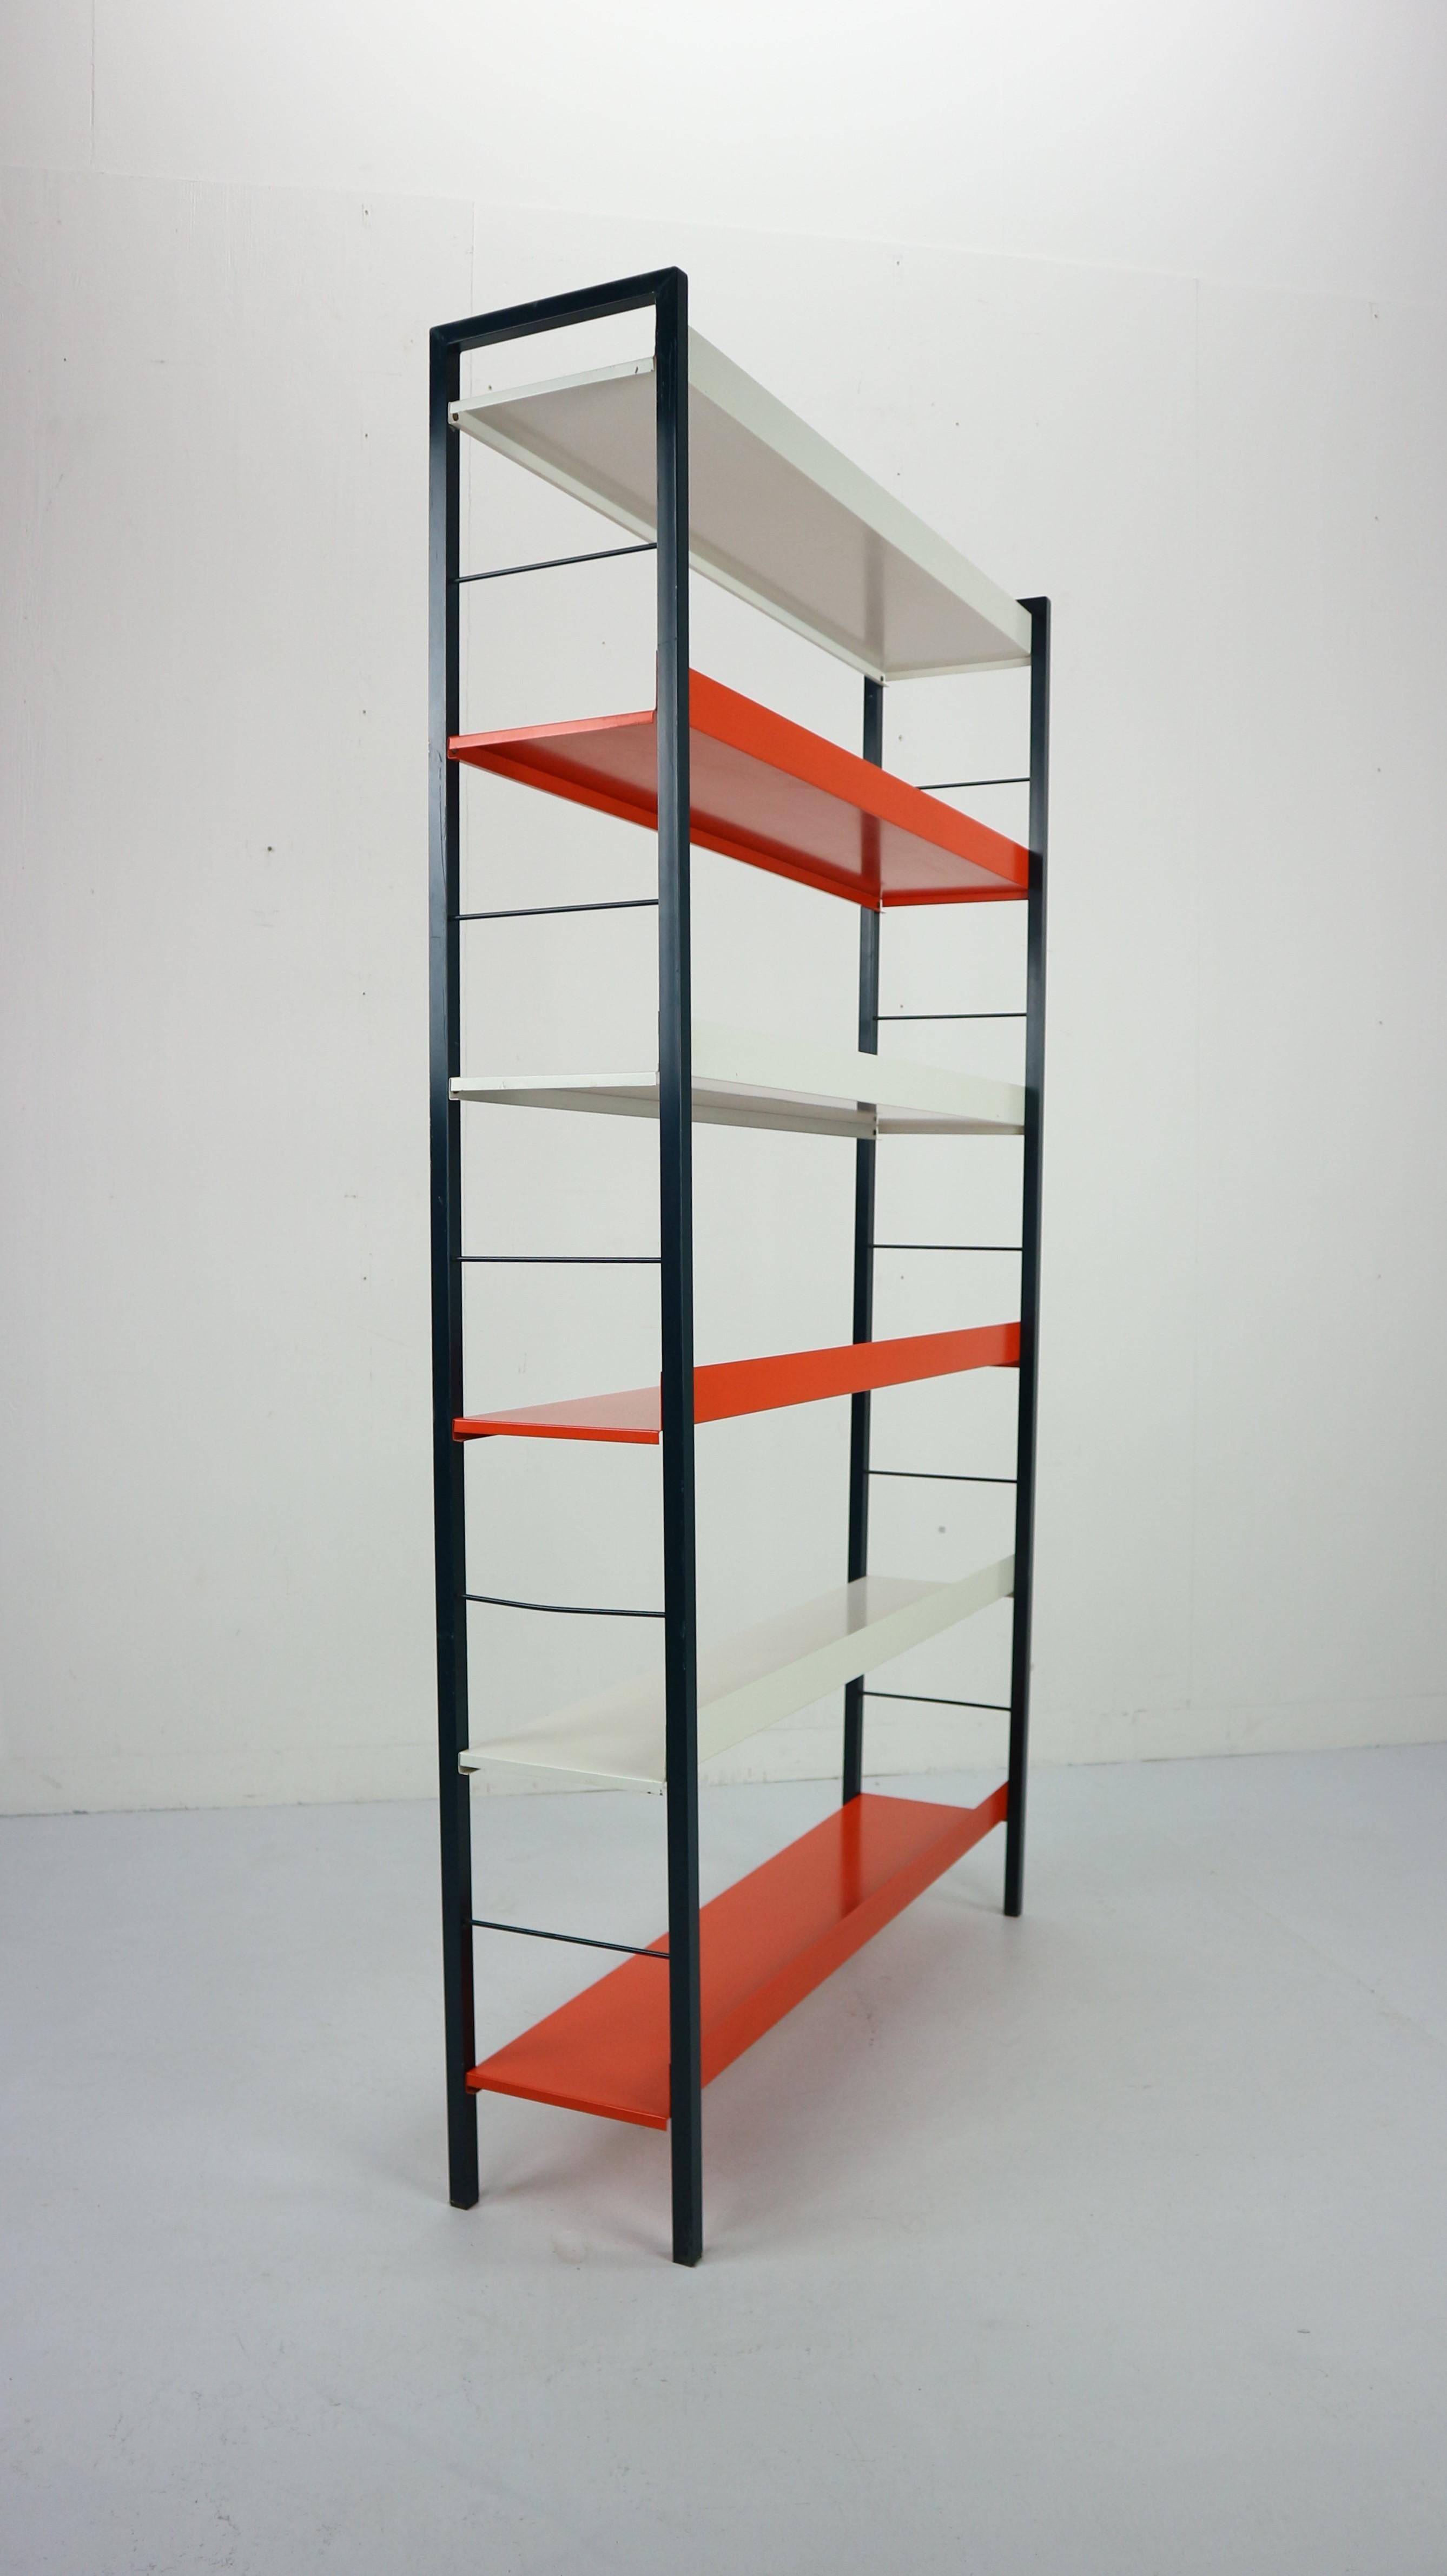 Mid-20th Century Freestanding Metal Book- Shelving Unit by A. D. Dekker for Tomado, 1950s